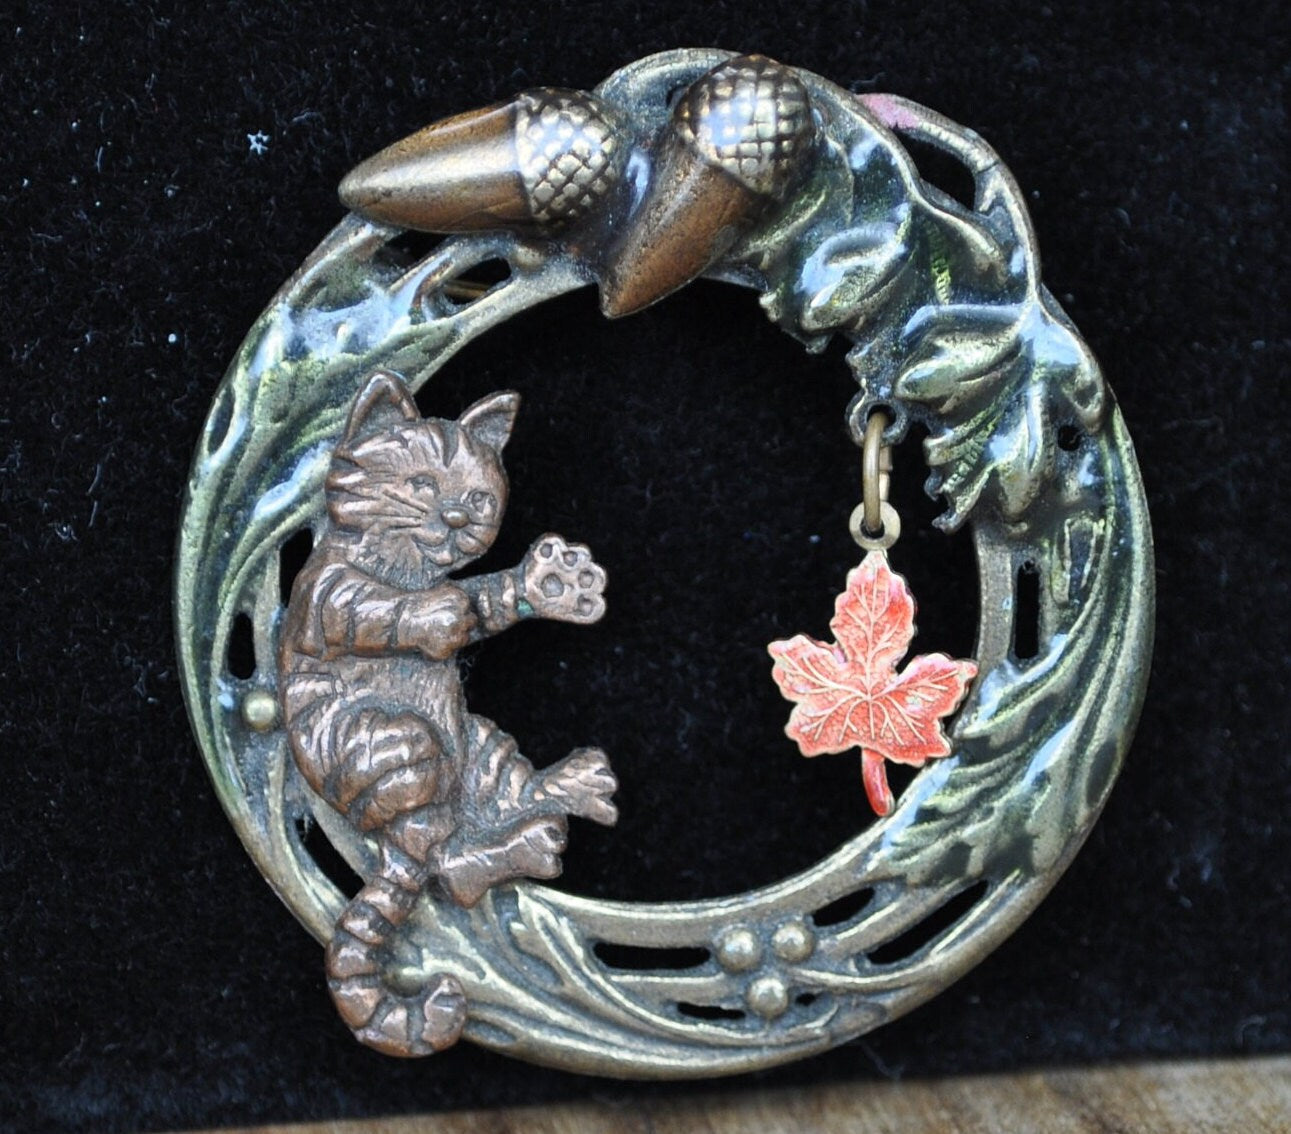 Awesome Vintage Cat Pin! Bronze - Cat Catching a Falling Leaf - Vintage Cat Brooch, Cat Jewelry, Hilarious